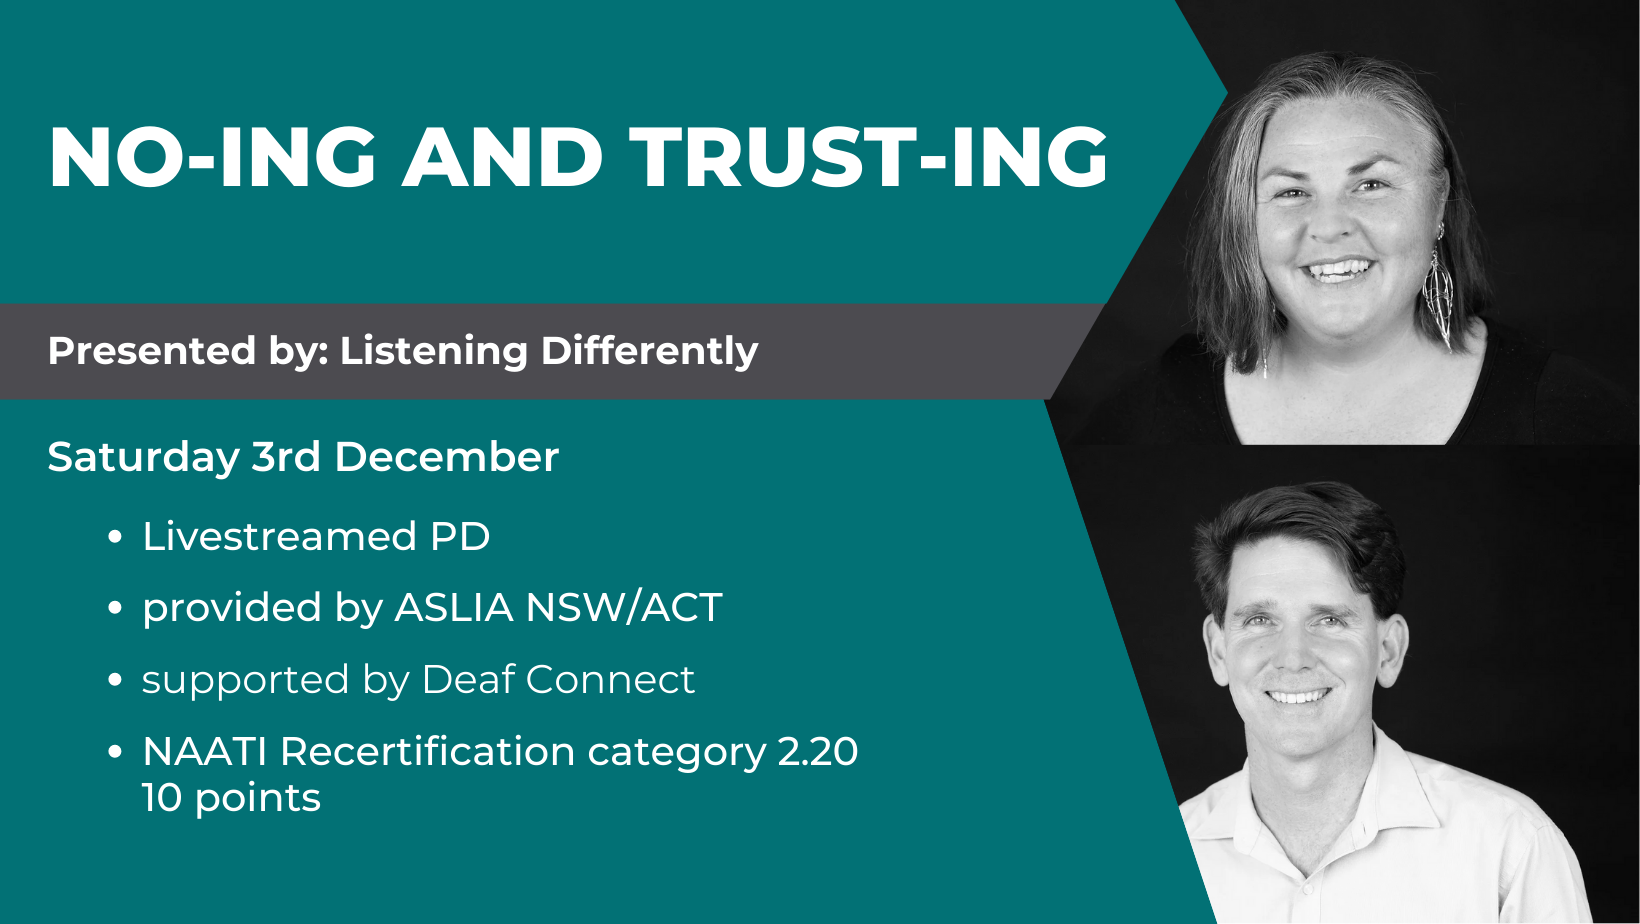 No-ing and Trust-ing – presented by Listening Differently